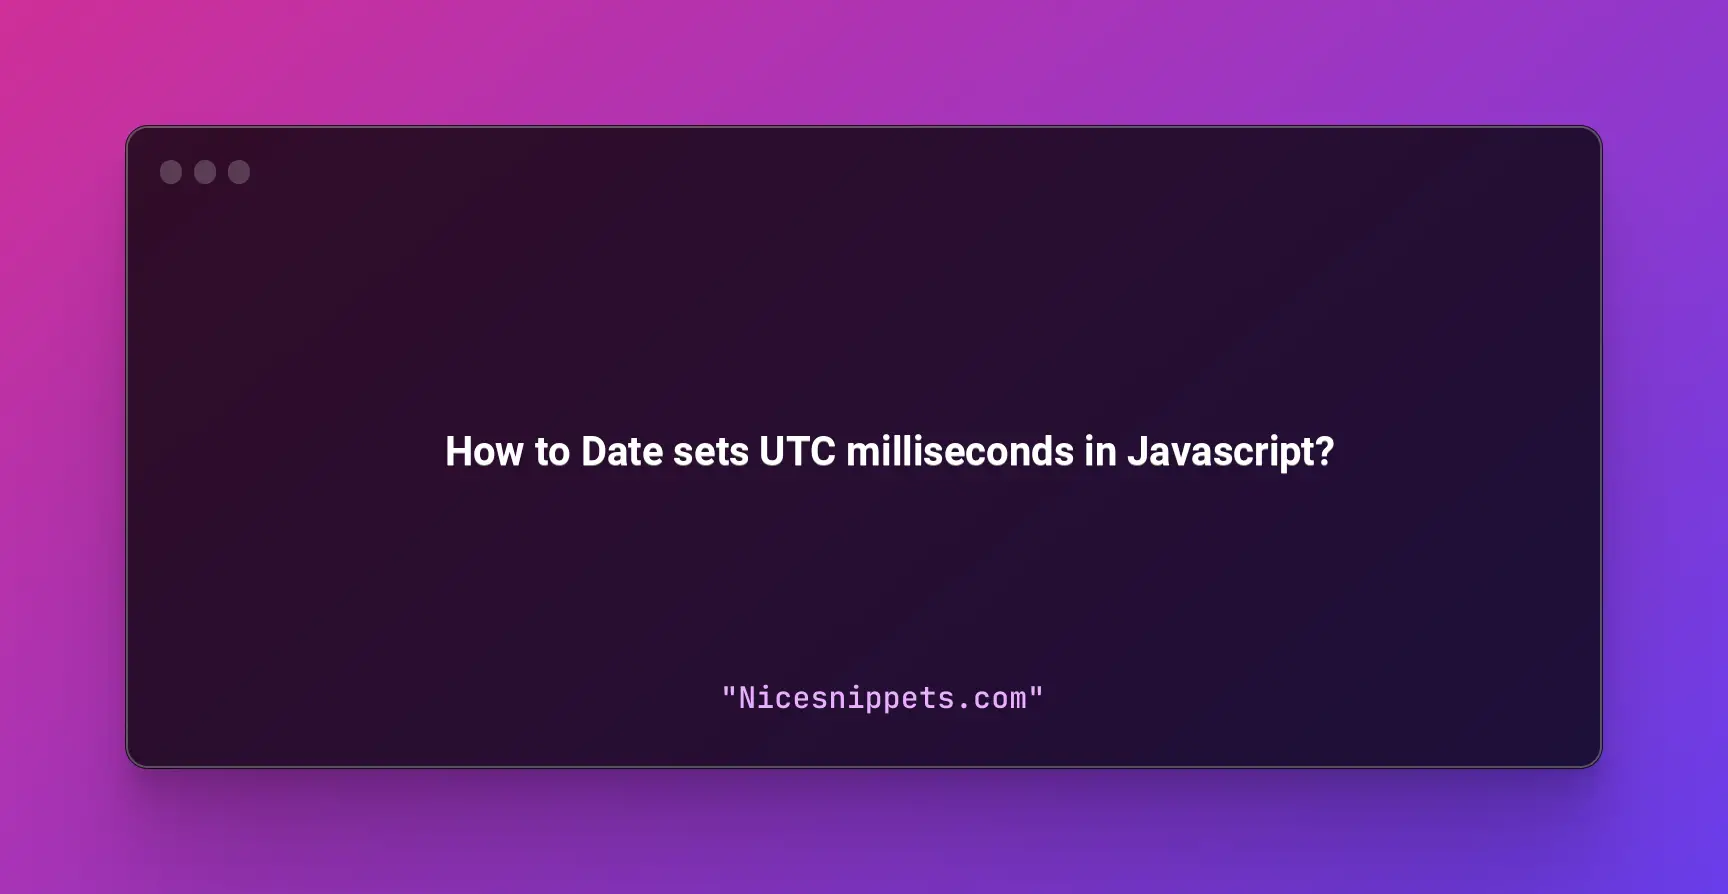 How to Date sets UTC milliseconds in Javascript?